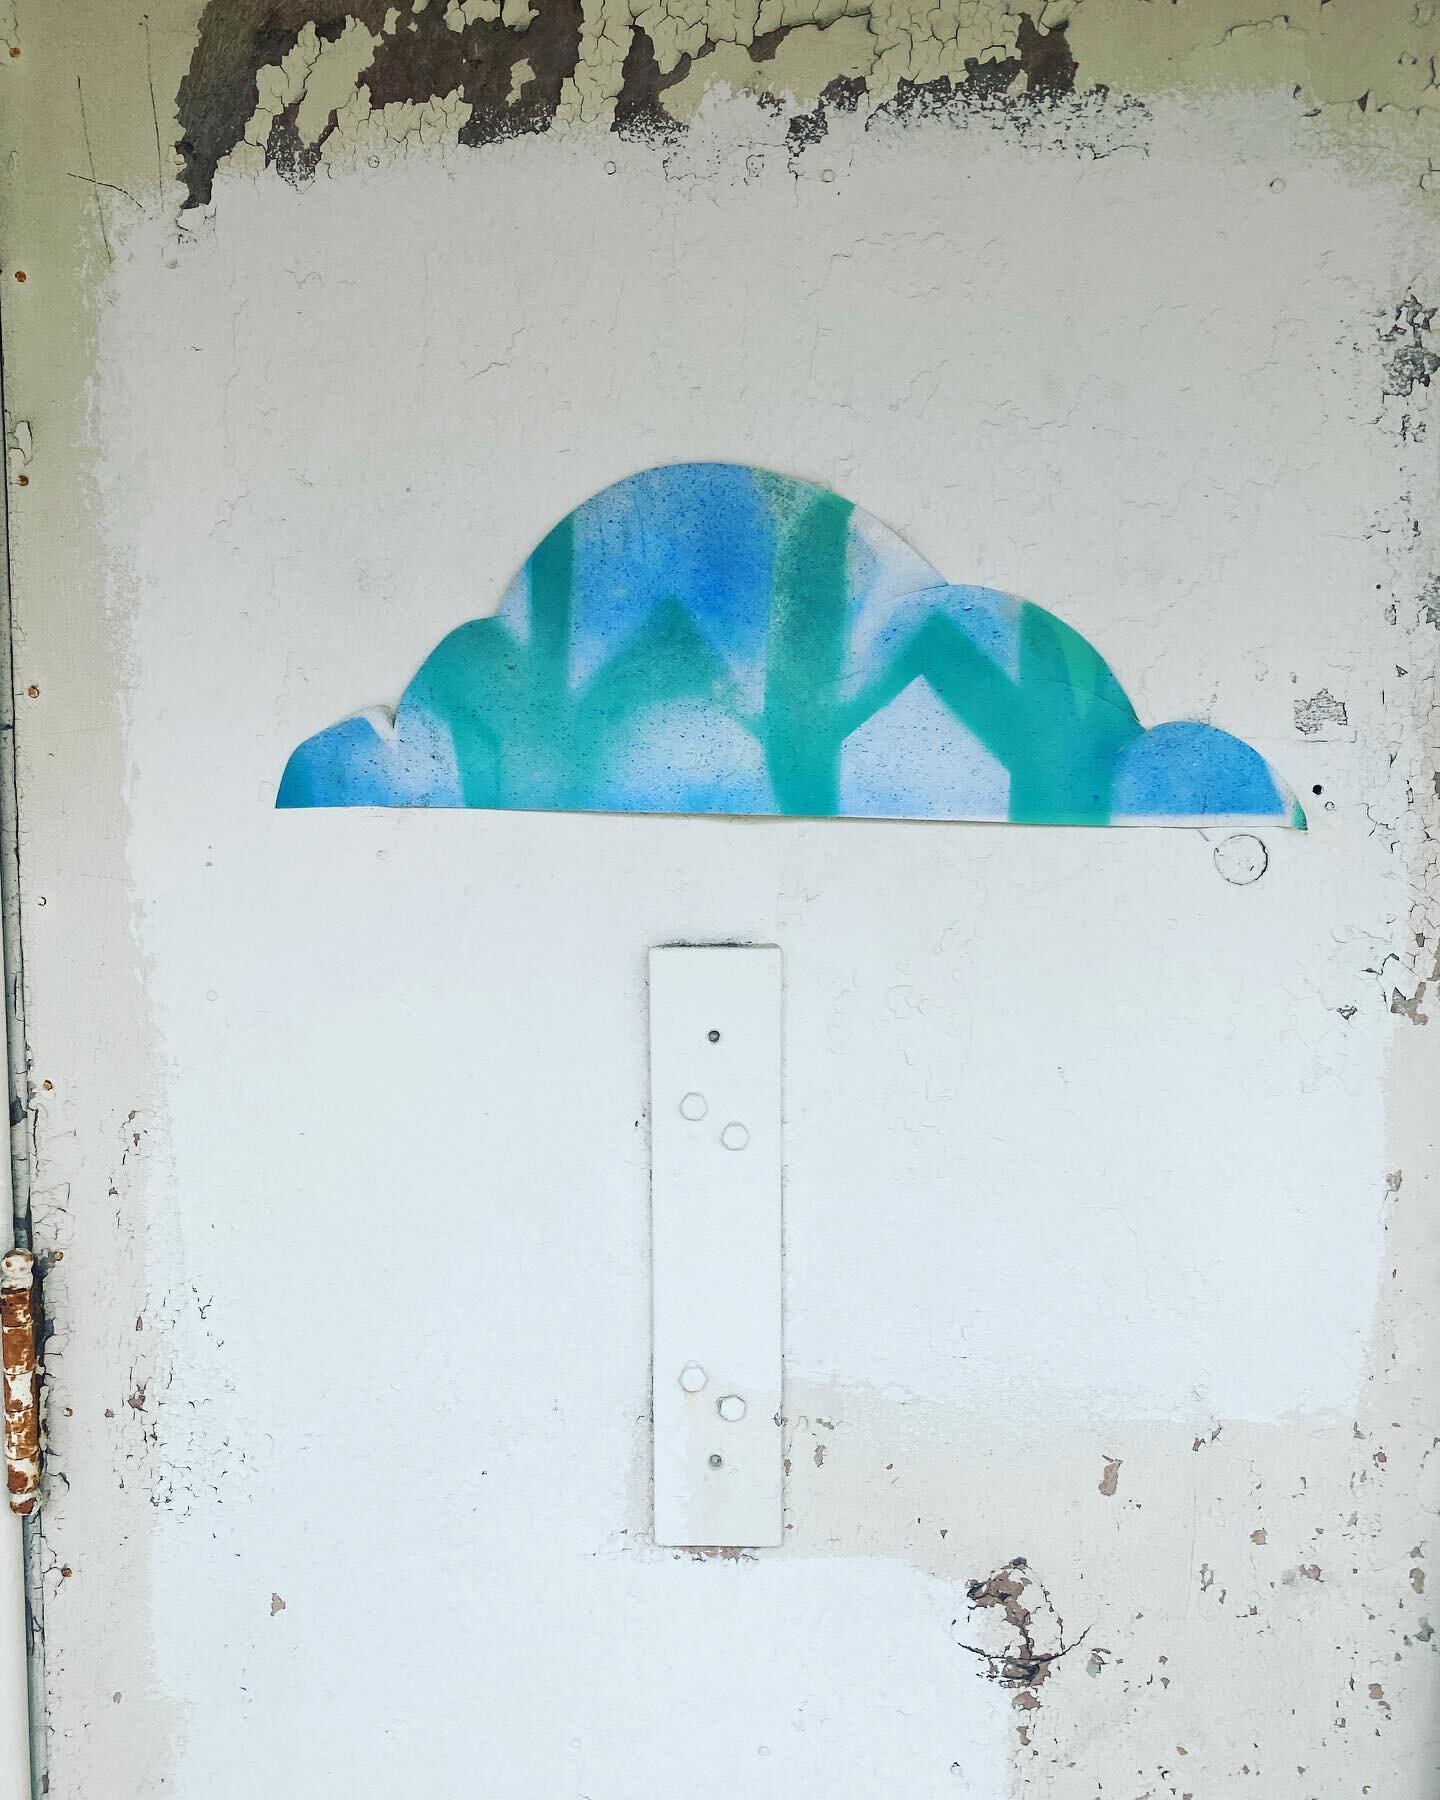 Graffiti cloud. Just thought Id mix up my usual posts of yarn and pottery with a reminder that beauty is everywhere. 

#streetart #clouds #graffitilove #urbanliving #nashville #changeitup